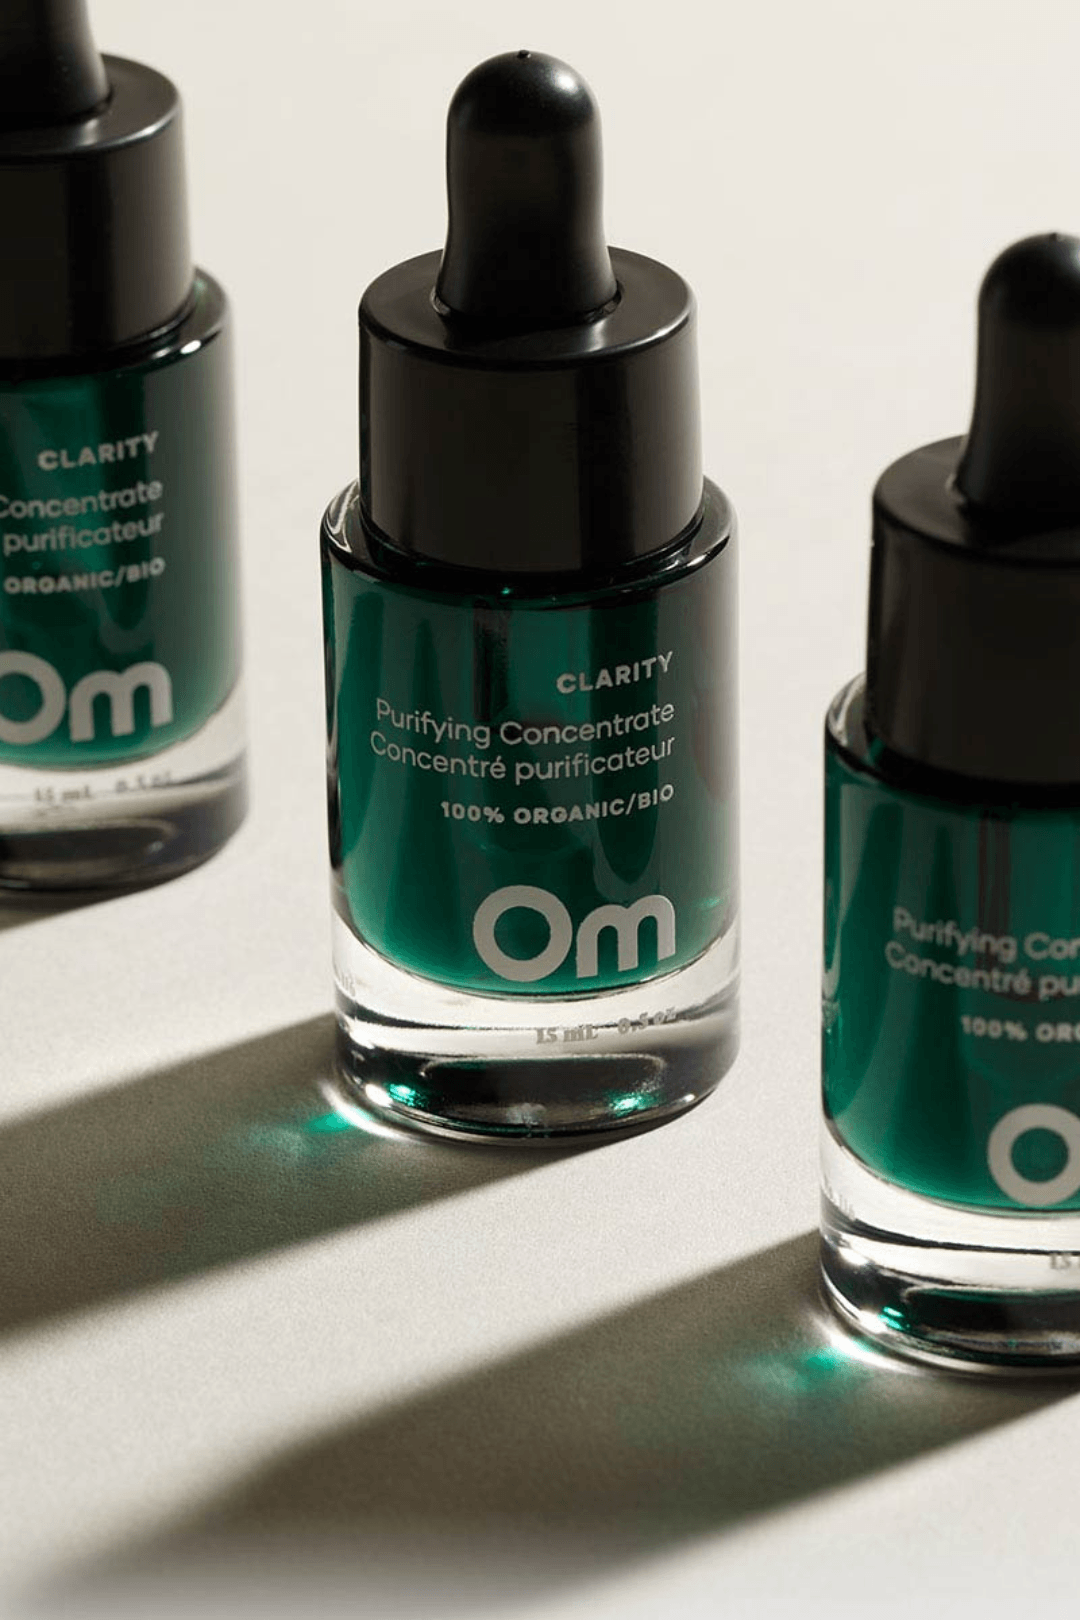 Clarity Purifying Concentrate - Ardent Market - Om Organics